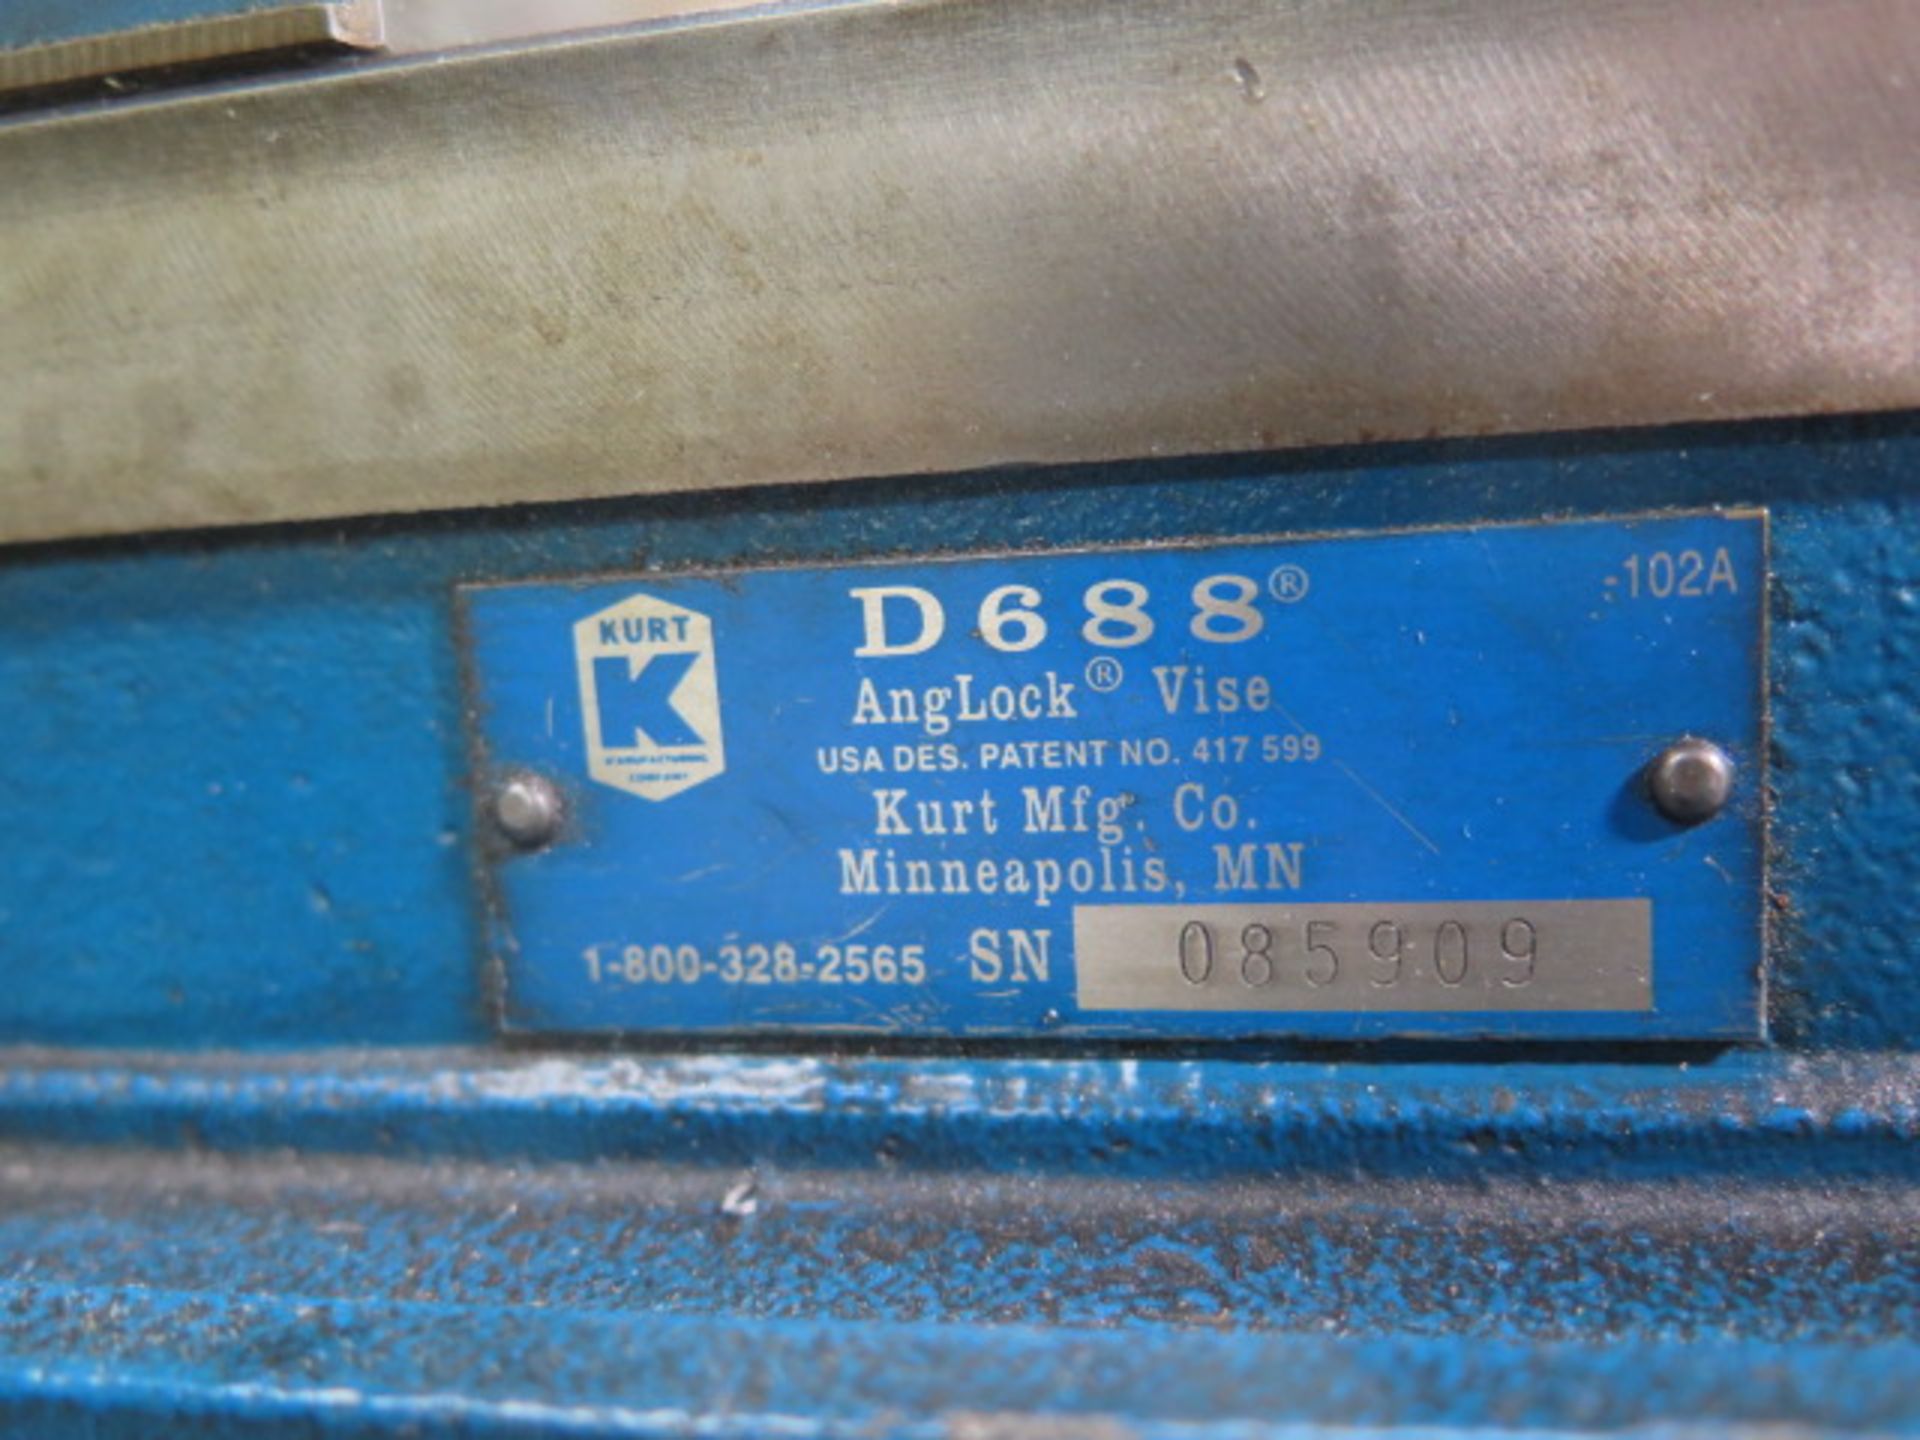 Kurt D688 6" Angle-Lock Vise (SOLD AS-IS - NO WARRANTY) - Image 5 of 5